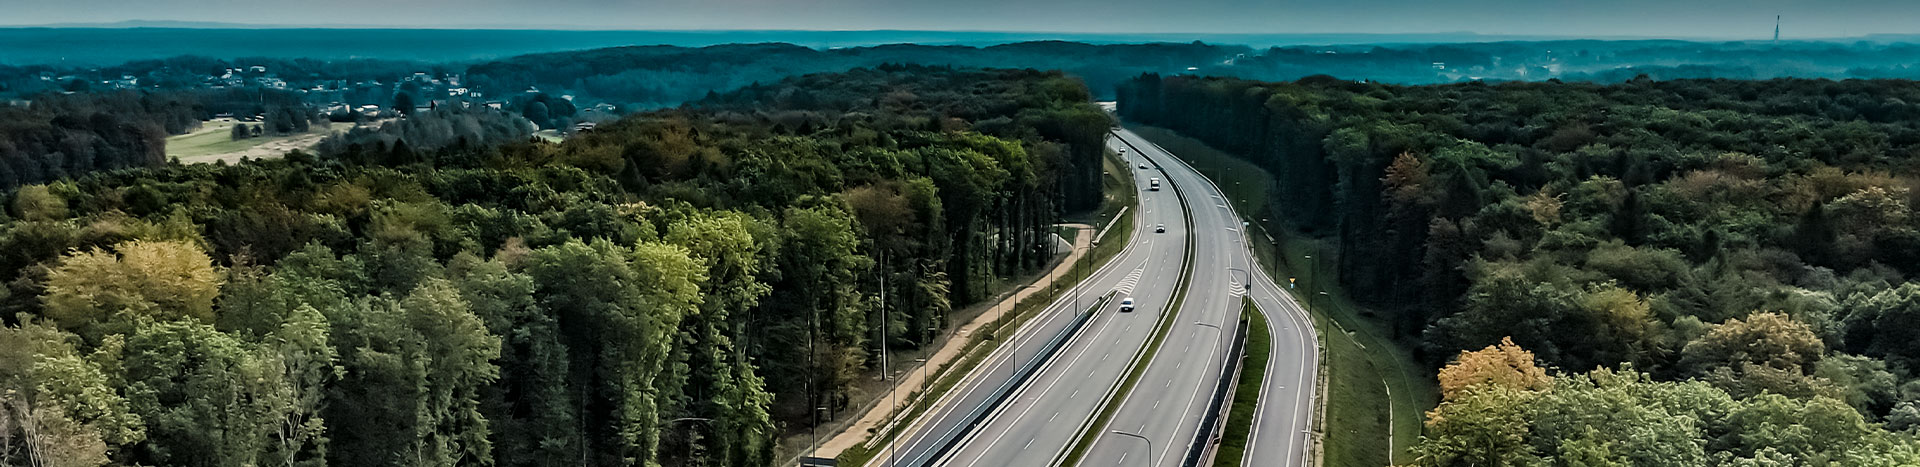 The photograph shows a fragment of the Racibórz-Pszczyna road running through Rybnik. You can see the new route with two lanes both ways and entries and exits. There are trees all around. A panorama is also visible. The photo was taken by Maciej Motylewski.